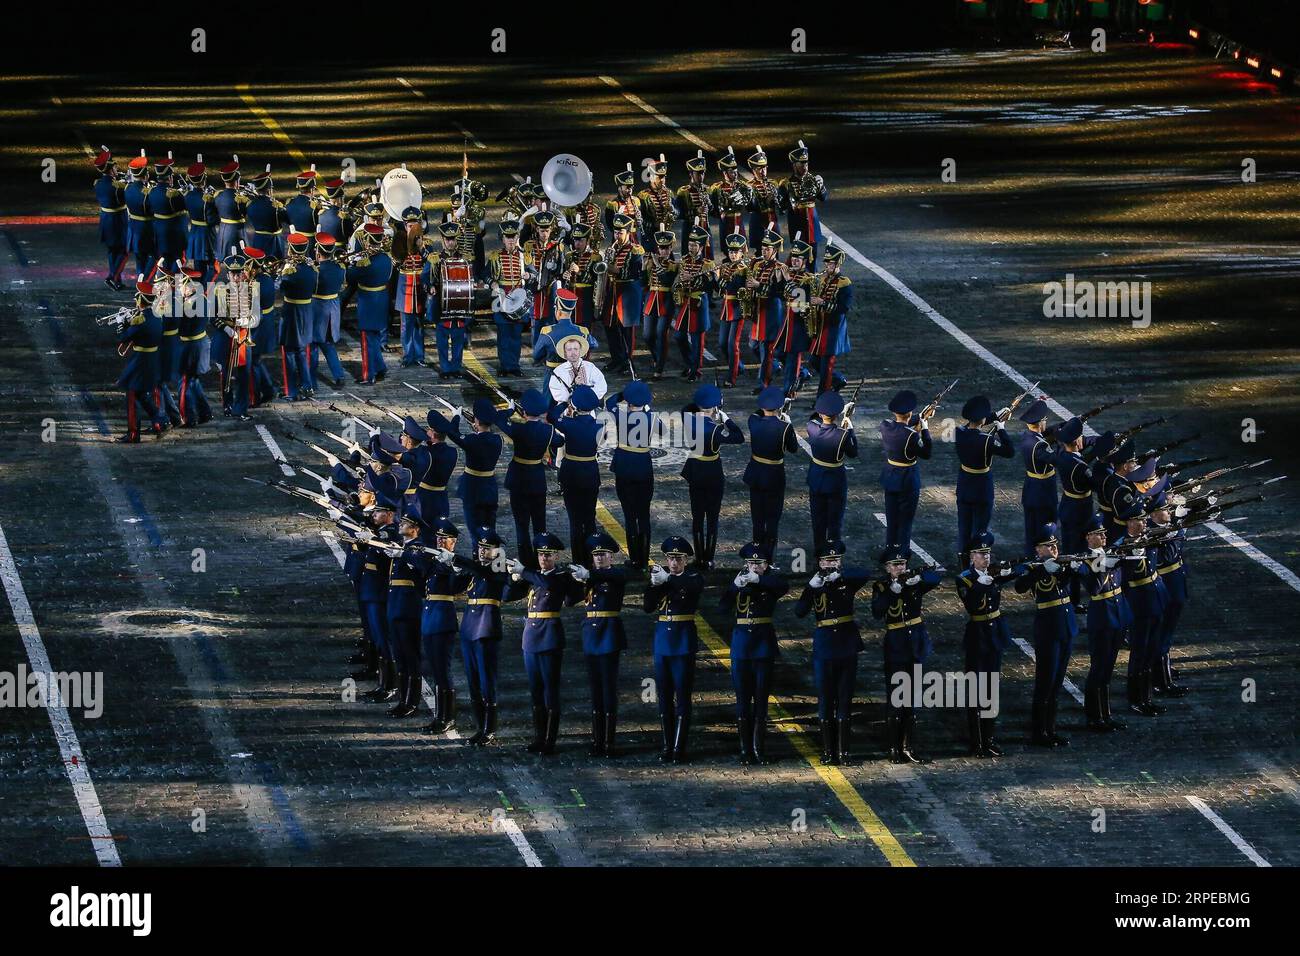 Russland, Militärmusik-Festival in Moskau (190824) -- MOSCOW, Aug. 24, 2019 -- Members of the band from Belarus perform during the opening day of Spasskaya Tower International Military Music Festival in Moscow, Russia, on Aug. 23, 2019. The annual military music festival opened on Friday on the Red Square in Moscow, and will run until September 1. Evgeny Sinitsyn) RUSSIA-MOSCOW-MILITARY MUSIC FESTIVAL-OPENING BaixXueqi PUBLICATIONxNOTxINxCHN Stock Photo